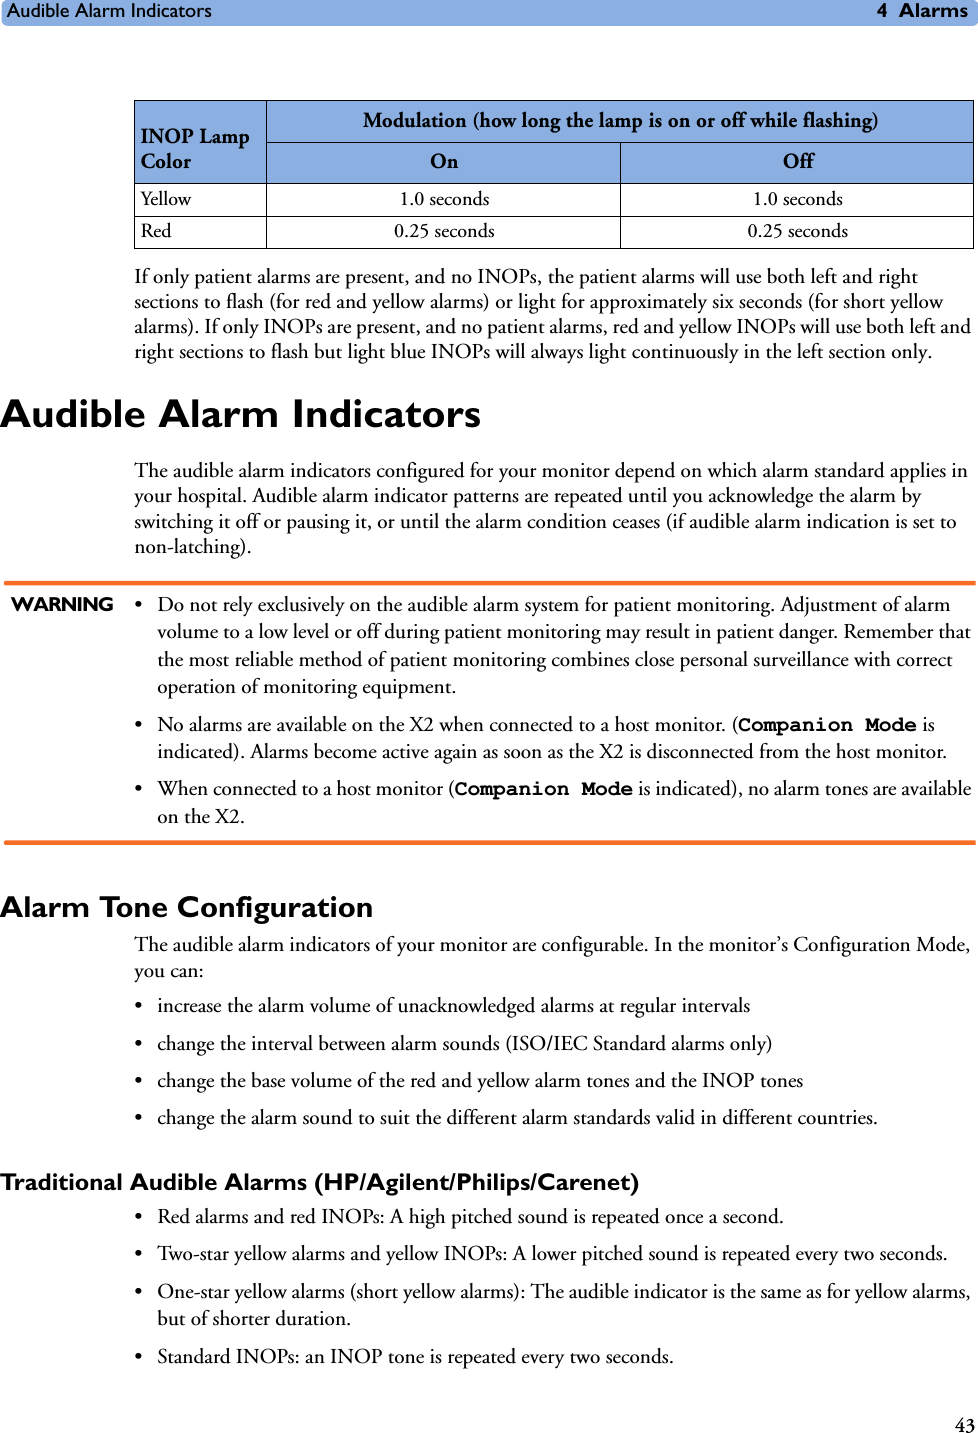 Audible Alarm Indicators 4Alarms43If only patient alarms are present, and no INOPs, the patient alarms will use both left and right sections to flash (for red and yellow alarms) or light for approximately six seconds (for short yellow alarms). If only INOPs are present, and no patient alarms, red and yellow INOPs will use both left and right sections to flash but light blue INOPs will always light continuously in the left section only.Audible Alarm Indicators The audible alarm indicators configured for your monitor depend on which alarm standard applies in your hospital. Audible alarm indicator patterns are repeated until you acknowledge the alarm by switching it off or pausing it, or until the alarm condition ceases (if audible alarm indication is set to non-latching).WARNING • Do not rely exclusively on the audible alarm system for patient monitoring. Adjustment of alarm volume to a low level or off during patient monitoring may result in patient danger. Remember that the most reliable method of patient monitoring combines close personal surveillance with correct operation of monitoring equipment.• No alarms are available on the X2 when connected to a host monitor. (Companion Mode is indicated). Alarms become active again as soon as the X2 is disconnected from the host monitor.• When connected to a host monitor (Companion Mode is indicated), no alarm tones are available on the X2.Alarm Tone Configuration The audible alarm indicators of your monitor are configurable. In the monitor’s Configuration Mode, you can:• increase the alarm volume of unacknowledged alarms at regular intervals• change the interval between alarm sounds (ISO/IEC Standard alarms only)• change the base volume of the red and yellow alarm tones and the INOP tones• change the alarm sound to suit the different alarm standards valid in different countries.Traditional Audible Alarms (HP/Agilent/Philips/Carenet)• Red alarms and red INOPs: A high pitched sound is repeated once a second. • Two-star yellow alarms and yellow INOPs: A lower pitched sound is repeated every two seconds.• One-star yellow alarms (short yellow alarms): The audible indicator is the same as for yellow alarms, but of shorter duration.• Standard INOPs: an INOP tone is repeated every two seconds.INOP Lamp ColorModulation (how long the lamp is on or off while flashing)On OffYellow 1.0 seconds 1.0 secondsRed 0.25 seconds 0.25 seconds